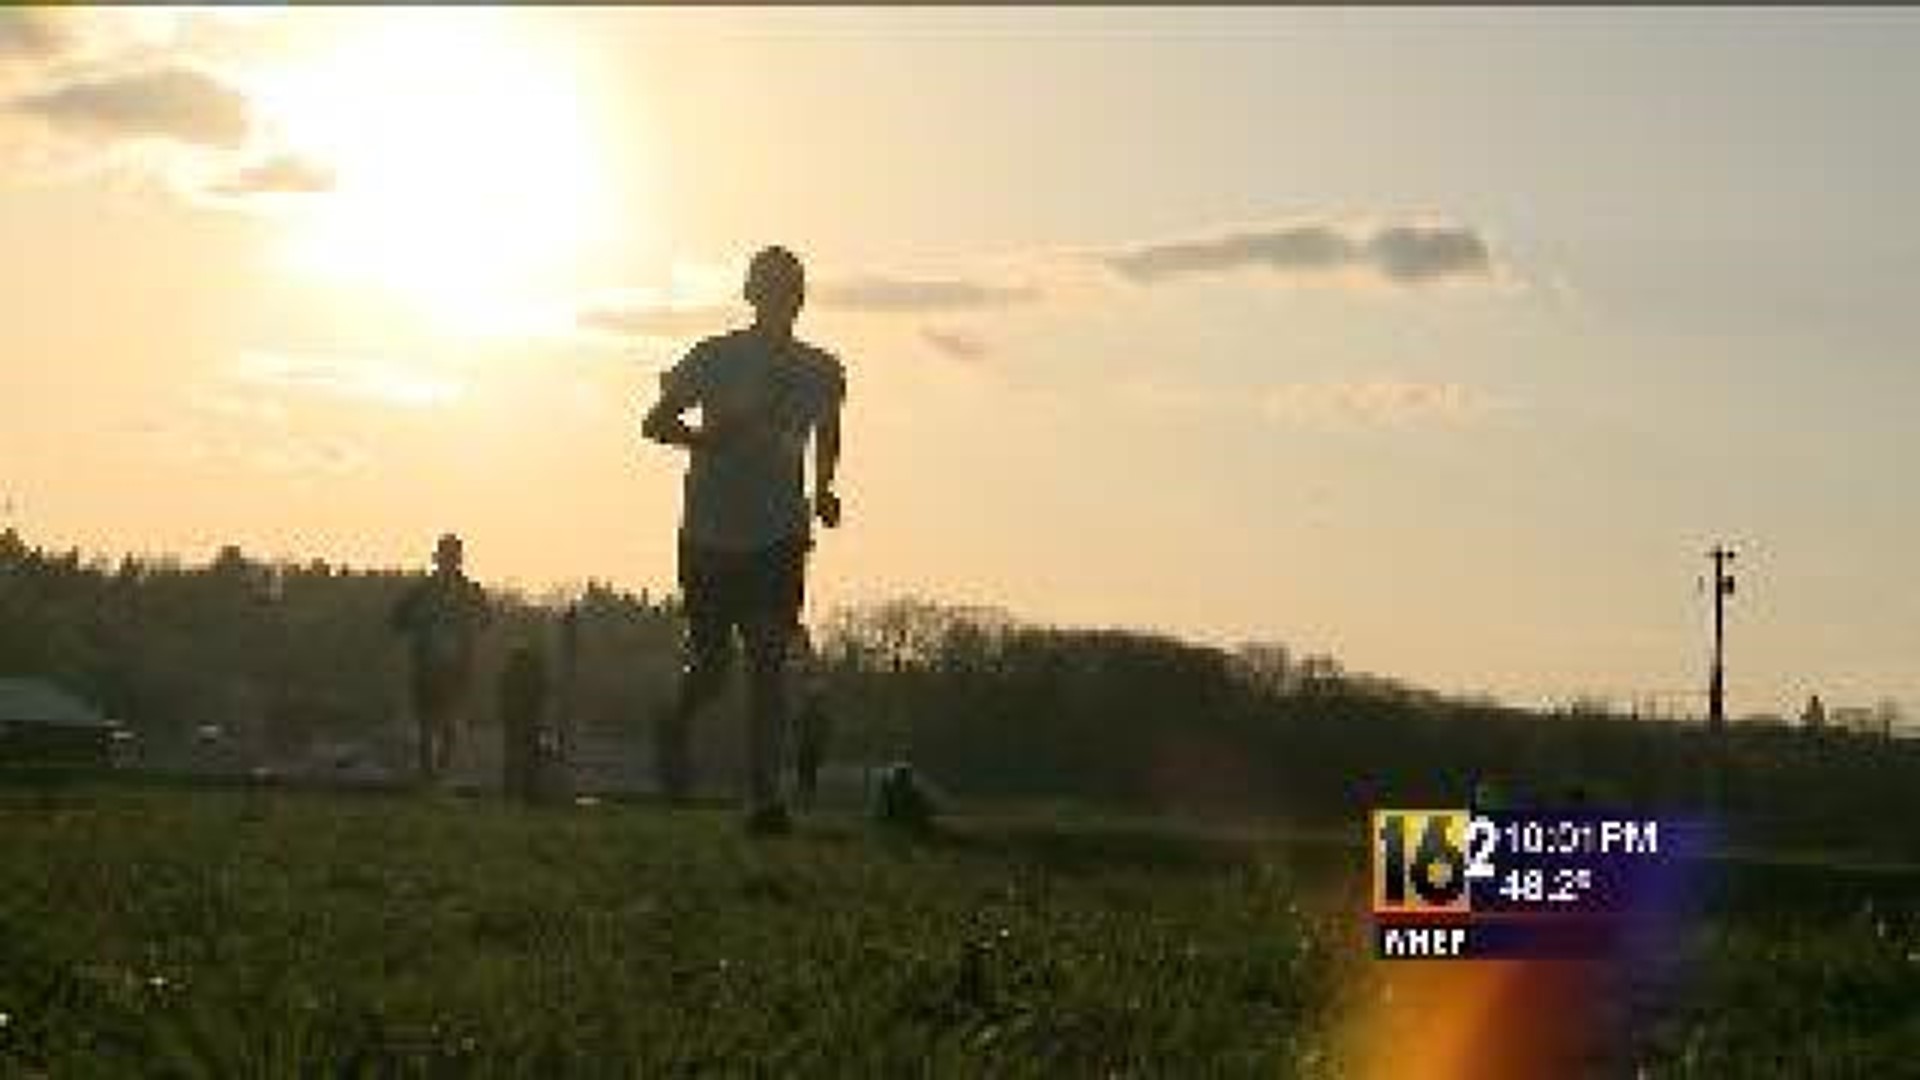 Runners Show Up For Nationwide Event For Boston